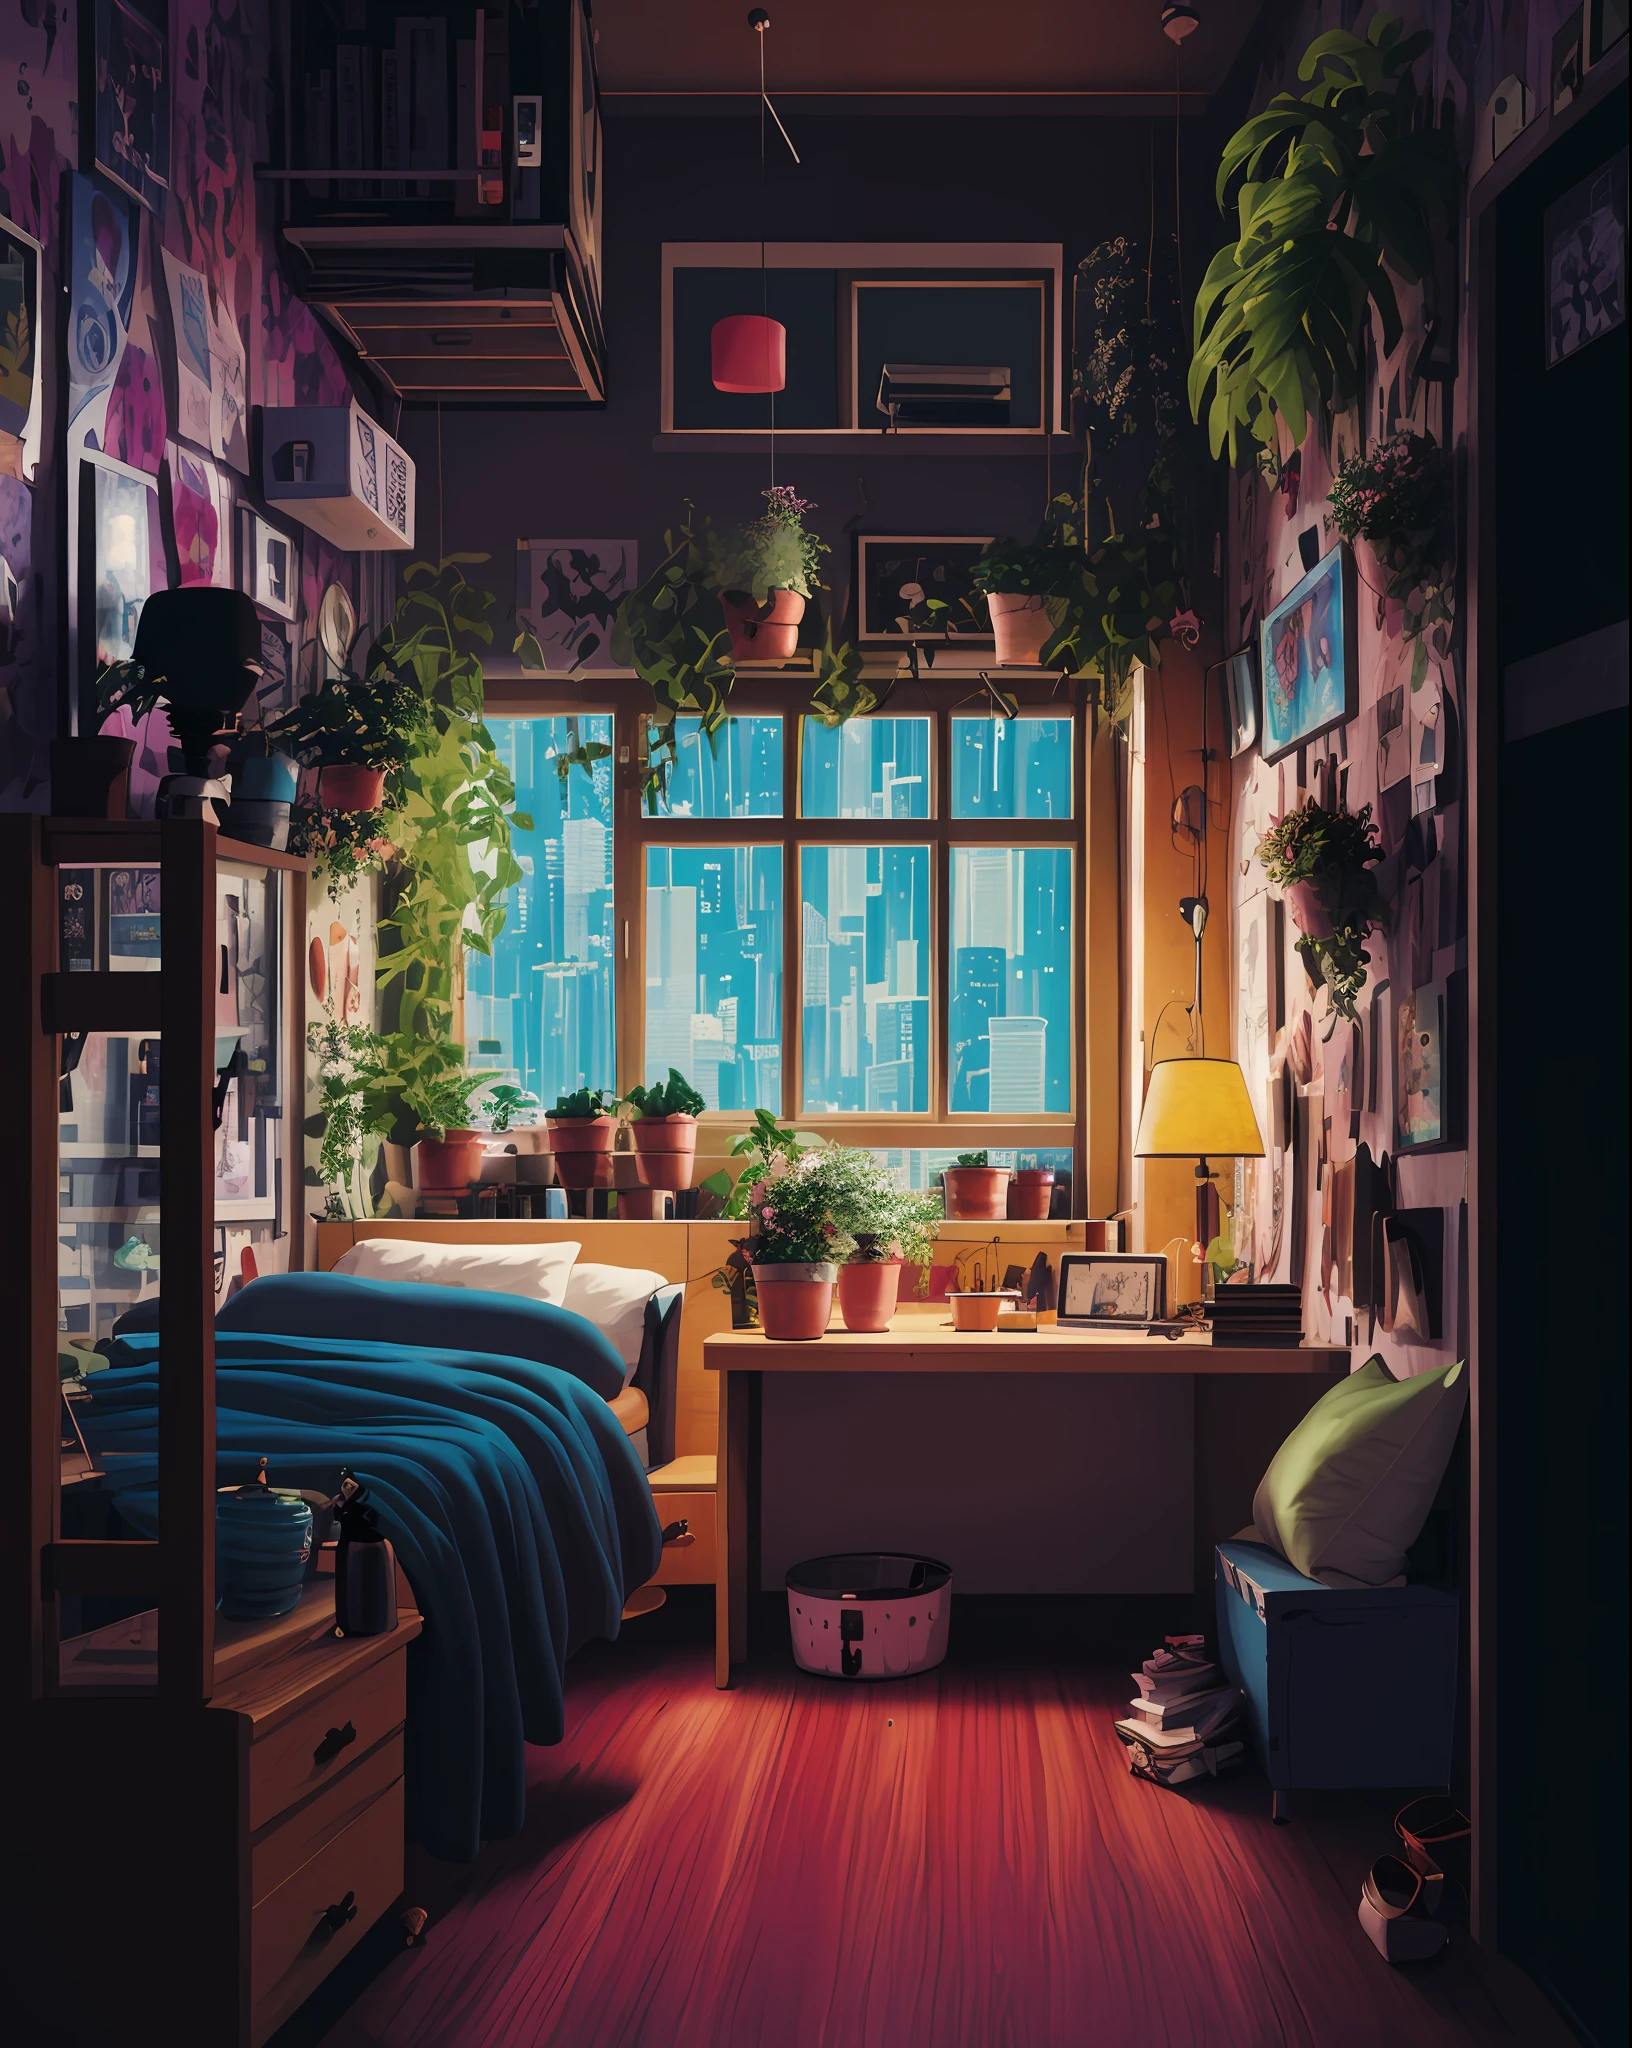 there is a room with a bed, desk, and a window, personal room background, cozy place, cyberpunk teenager bedroom, cozy room, cozy environment, cyberpunk bedroom at night, anime background art, cozy atmosphere, bedroom in studio ghibli, room full of plants, low detailed. digital painting, cinematic morning light, lofi artstyle, cozy wallpaper, photorealistic room